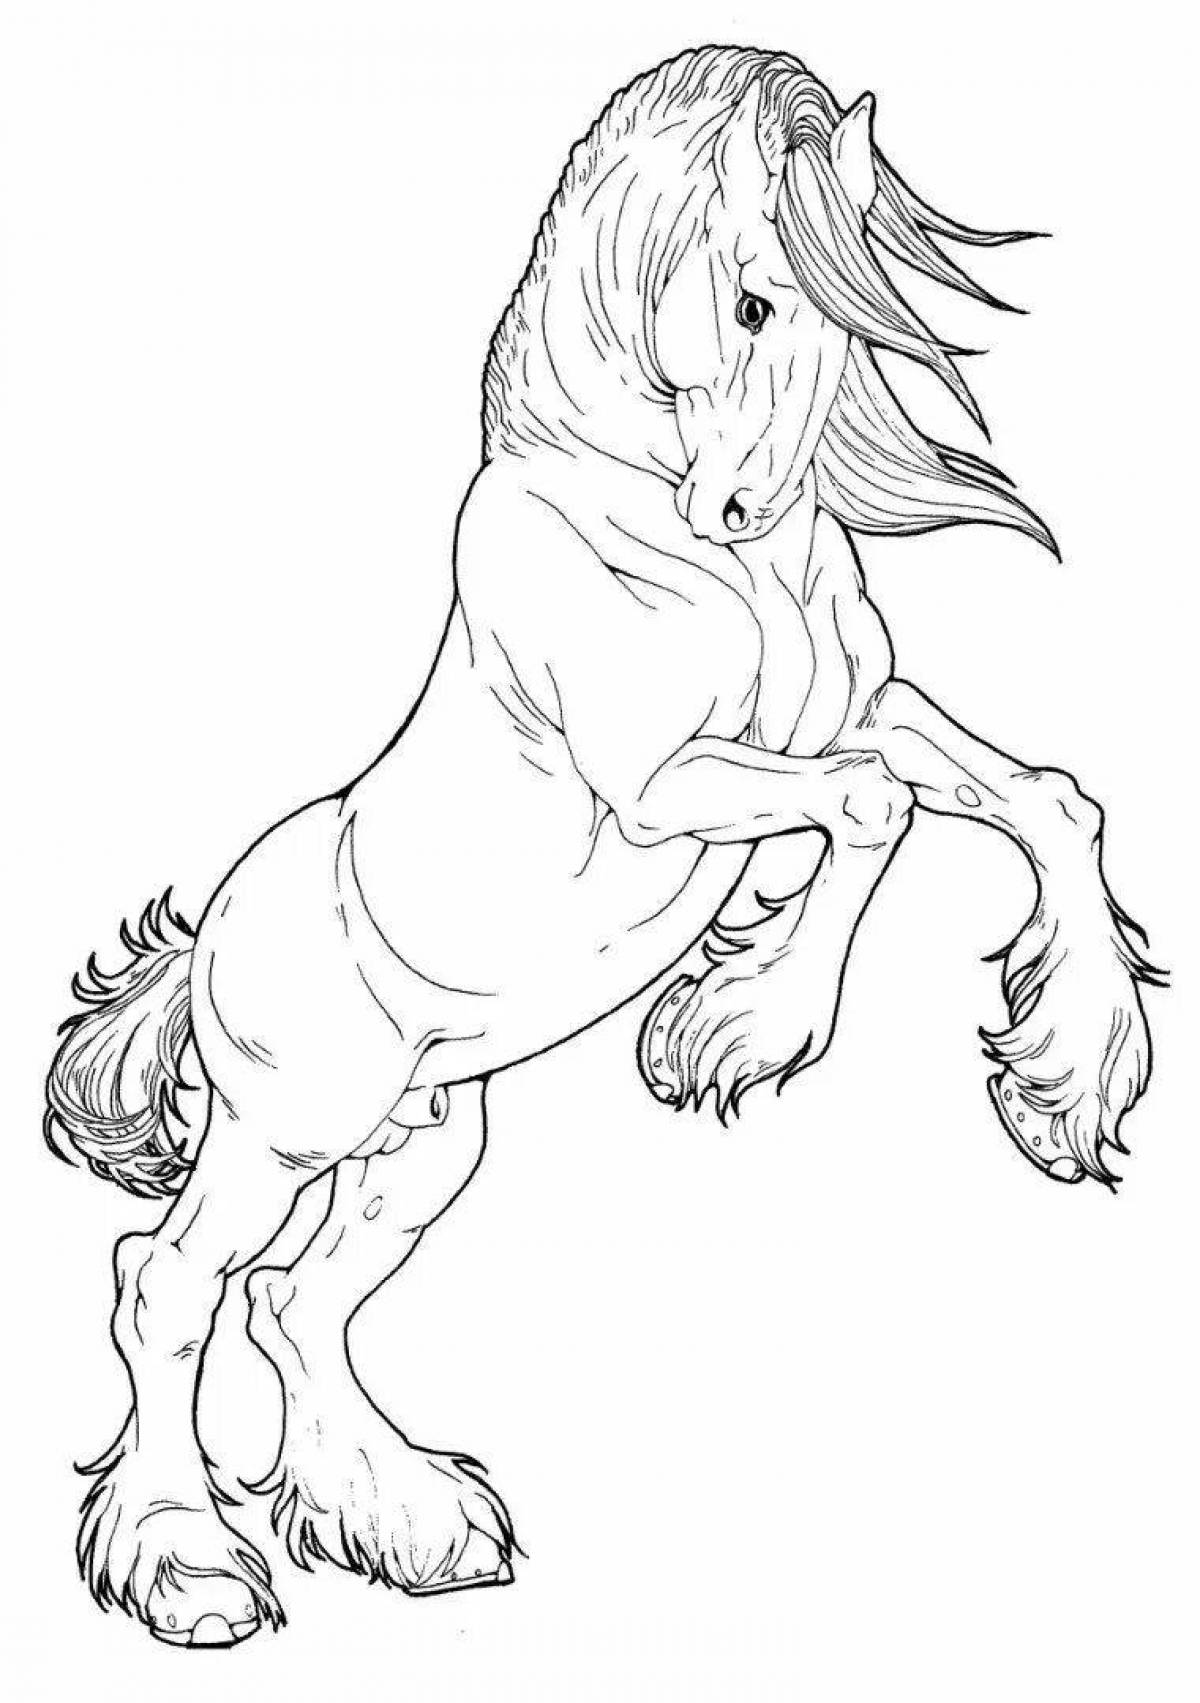 Coloring page shining horse rearing up